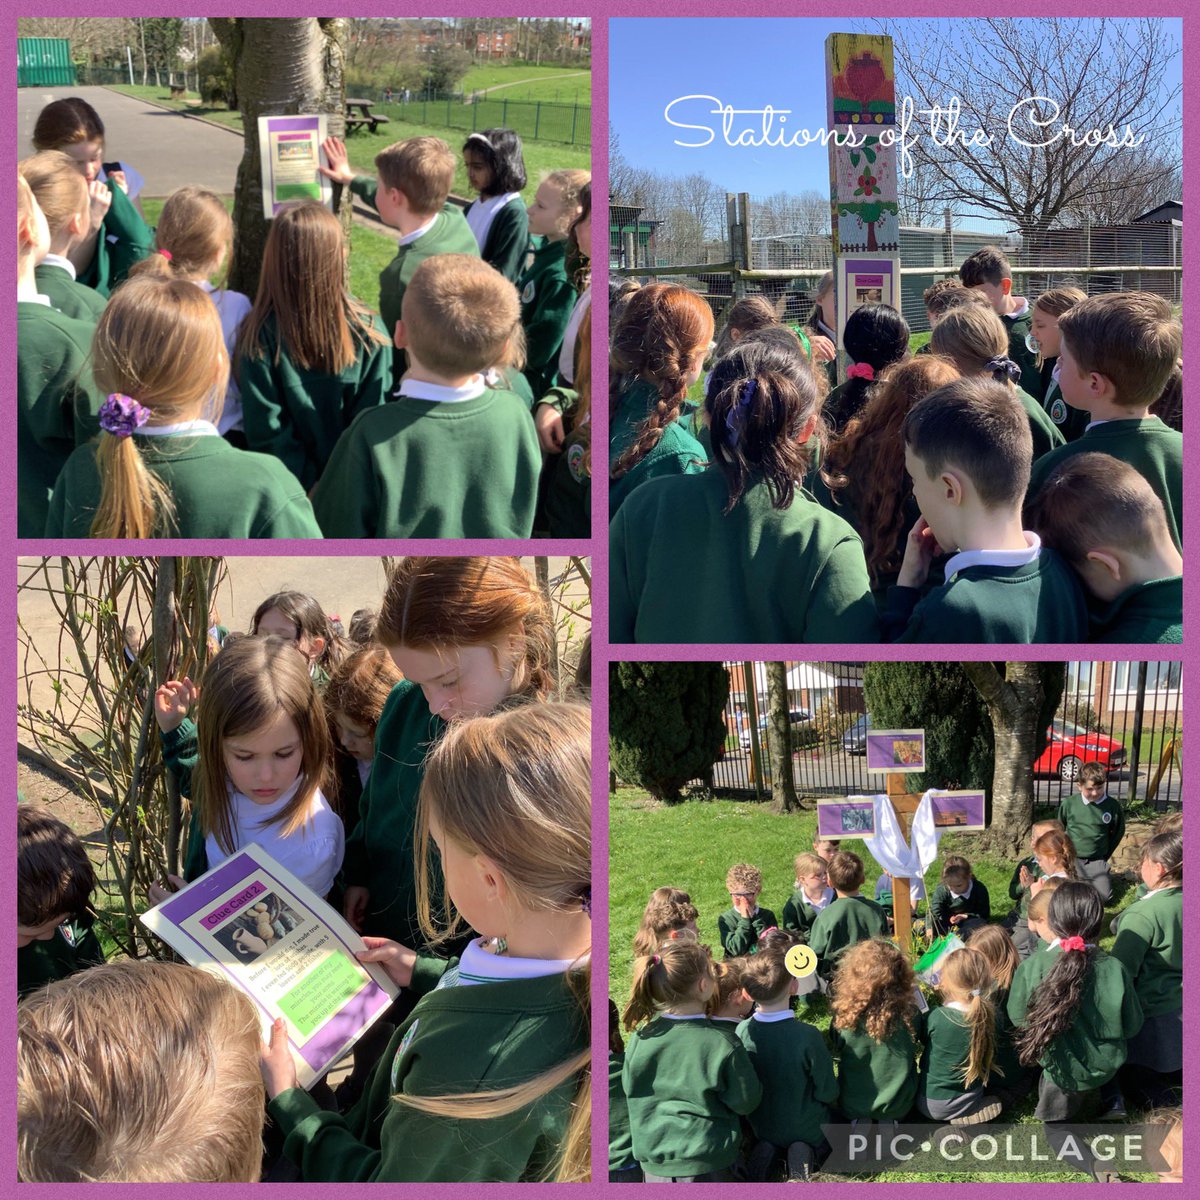 This afternoon we took part in a scavenger hunt around school, finding and sharing clues that led us to our cross. We reflected on Jesus’ sacrifice together and offered our prayers of love and gratitude 🙏🏼 #sjsbworship #sjsbliturgy #sjsbre #sjsbCLM #StationsOfTheCross #HolyWeek